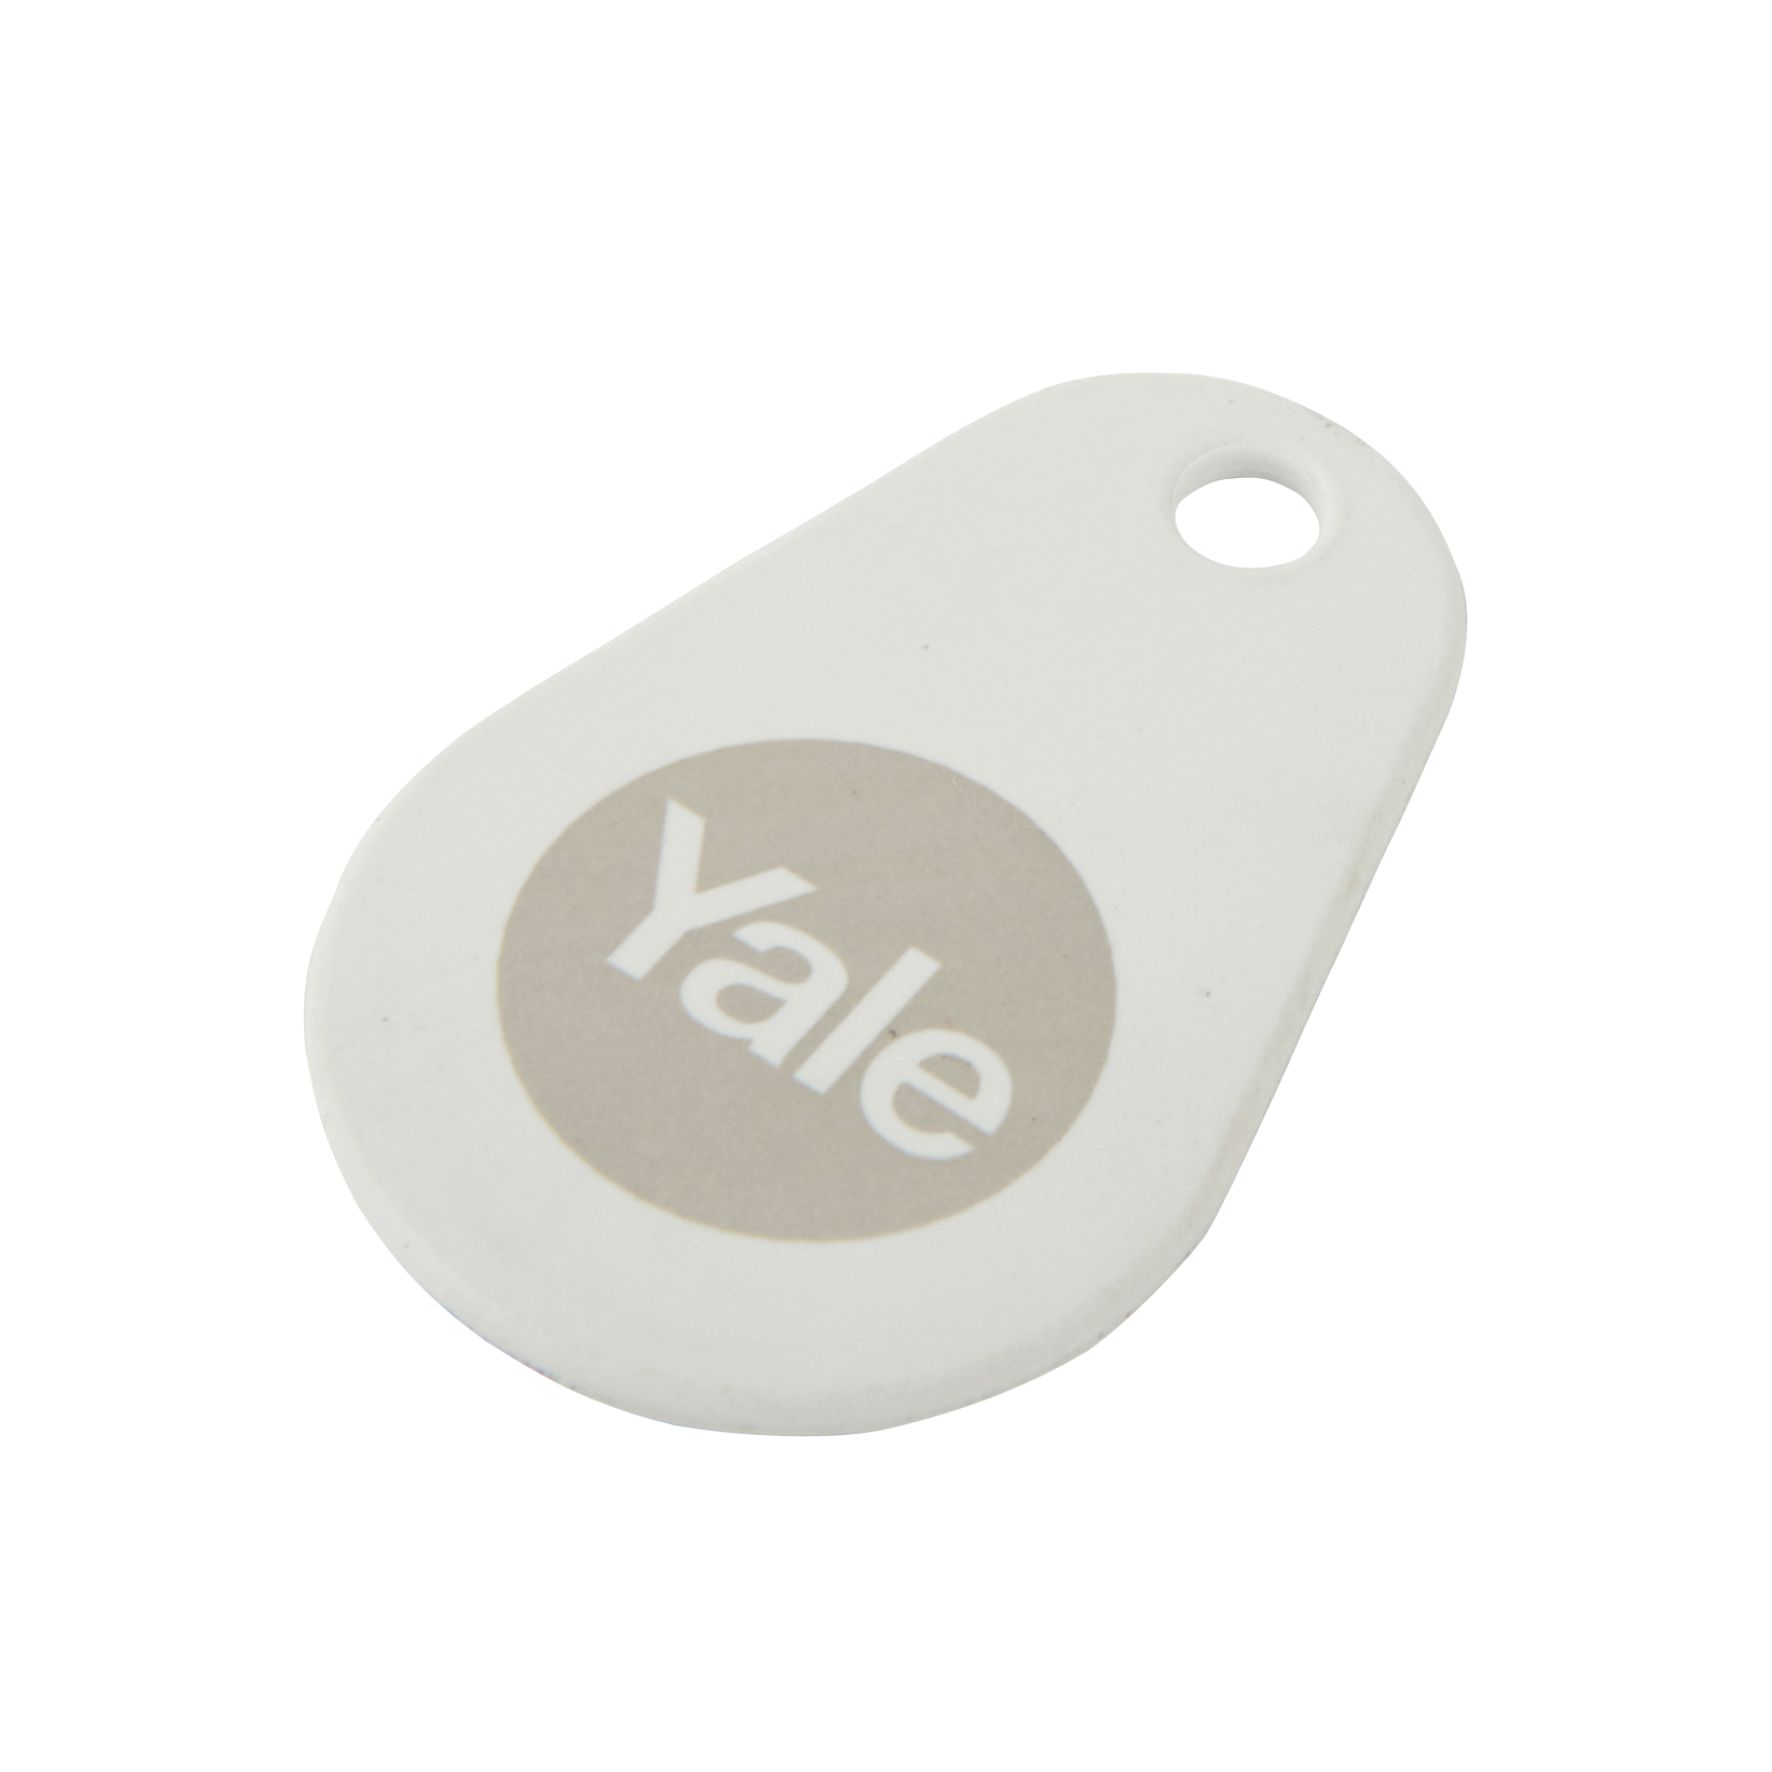 Yale Keyless Connected Key Tag Twin Pack